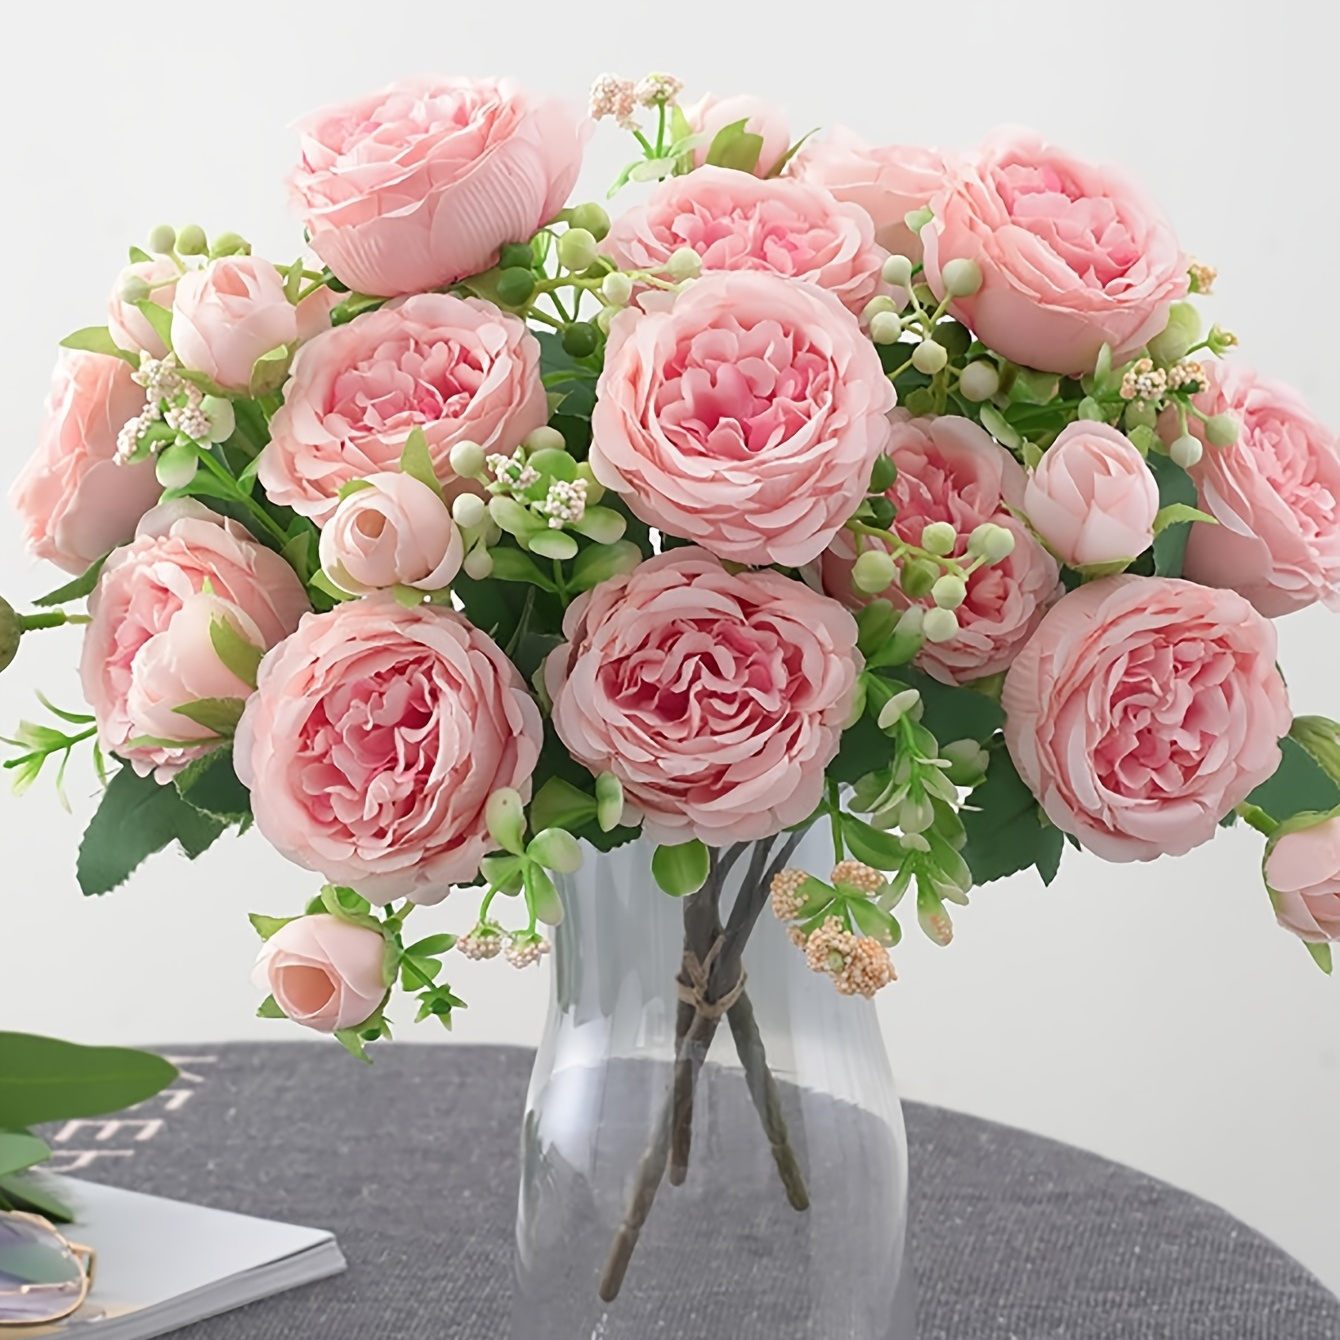 

1pc 5 Heads Simulation Persian Roses For Diy Bouquets And Home Decor - Plastic Flower Perfect For Weddings, Engagement Parties, Mother's Day, Birthdays, And More!